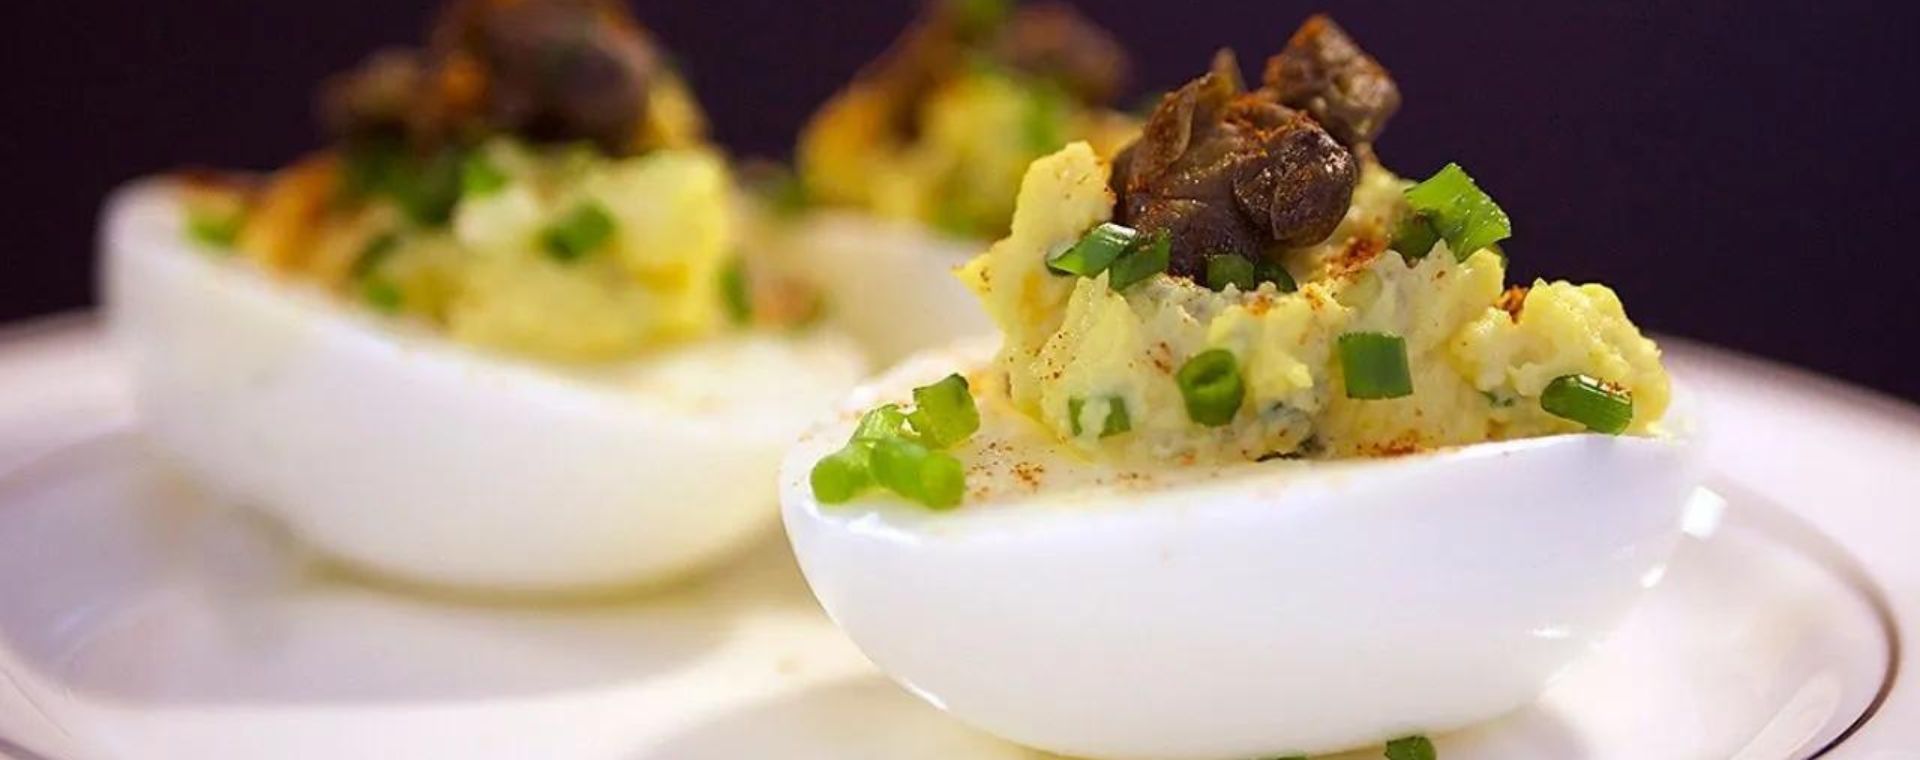 deviled eggs with capers